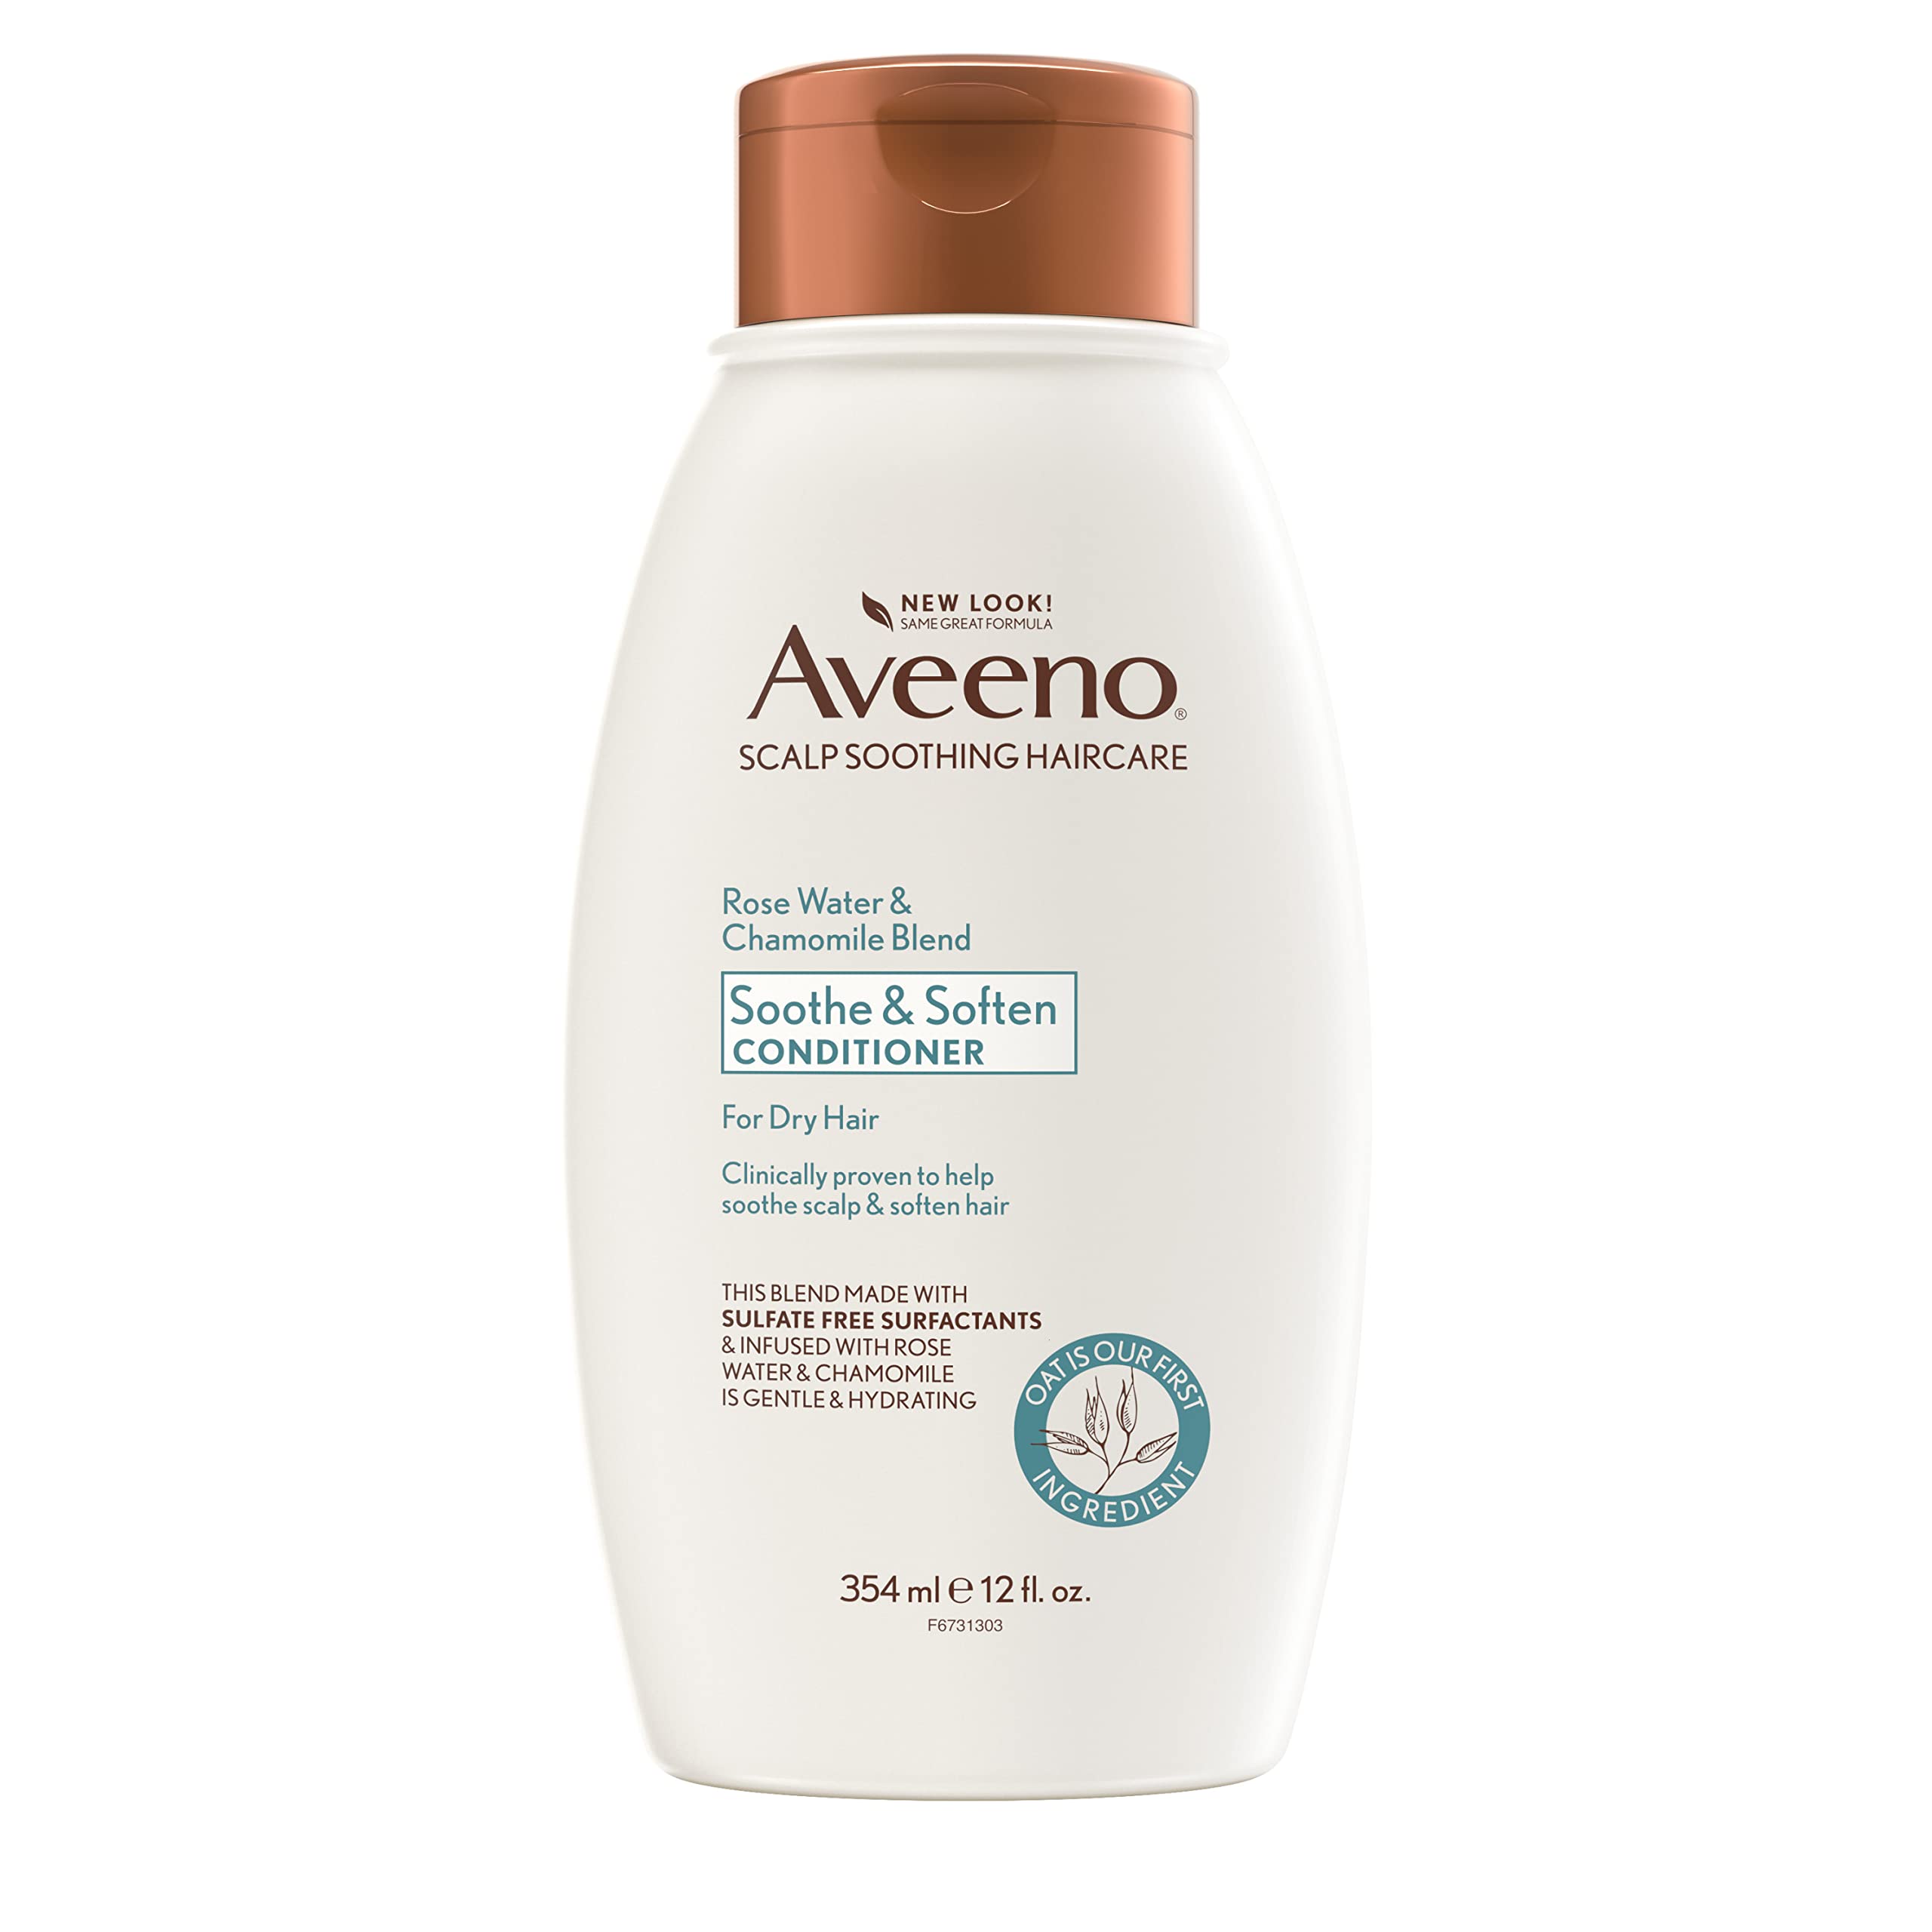 Aveeno Rose Water & Chamomile Blend Sulfate-Free Conditioner with Colloidal Oat for Dry Sensitive Scalp, Gentle Cleansing Conditioner for Fine, Fragile Hair, Paraben & Dye-Free, 12 Fl Oz